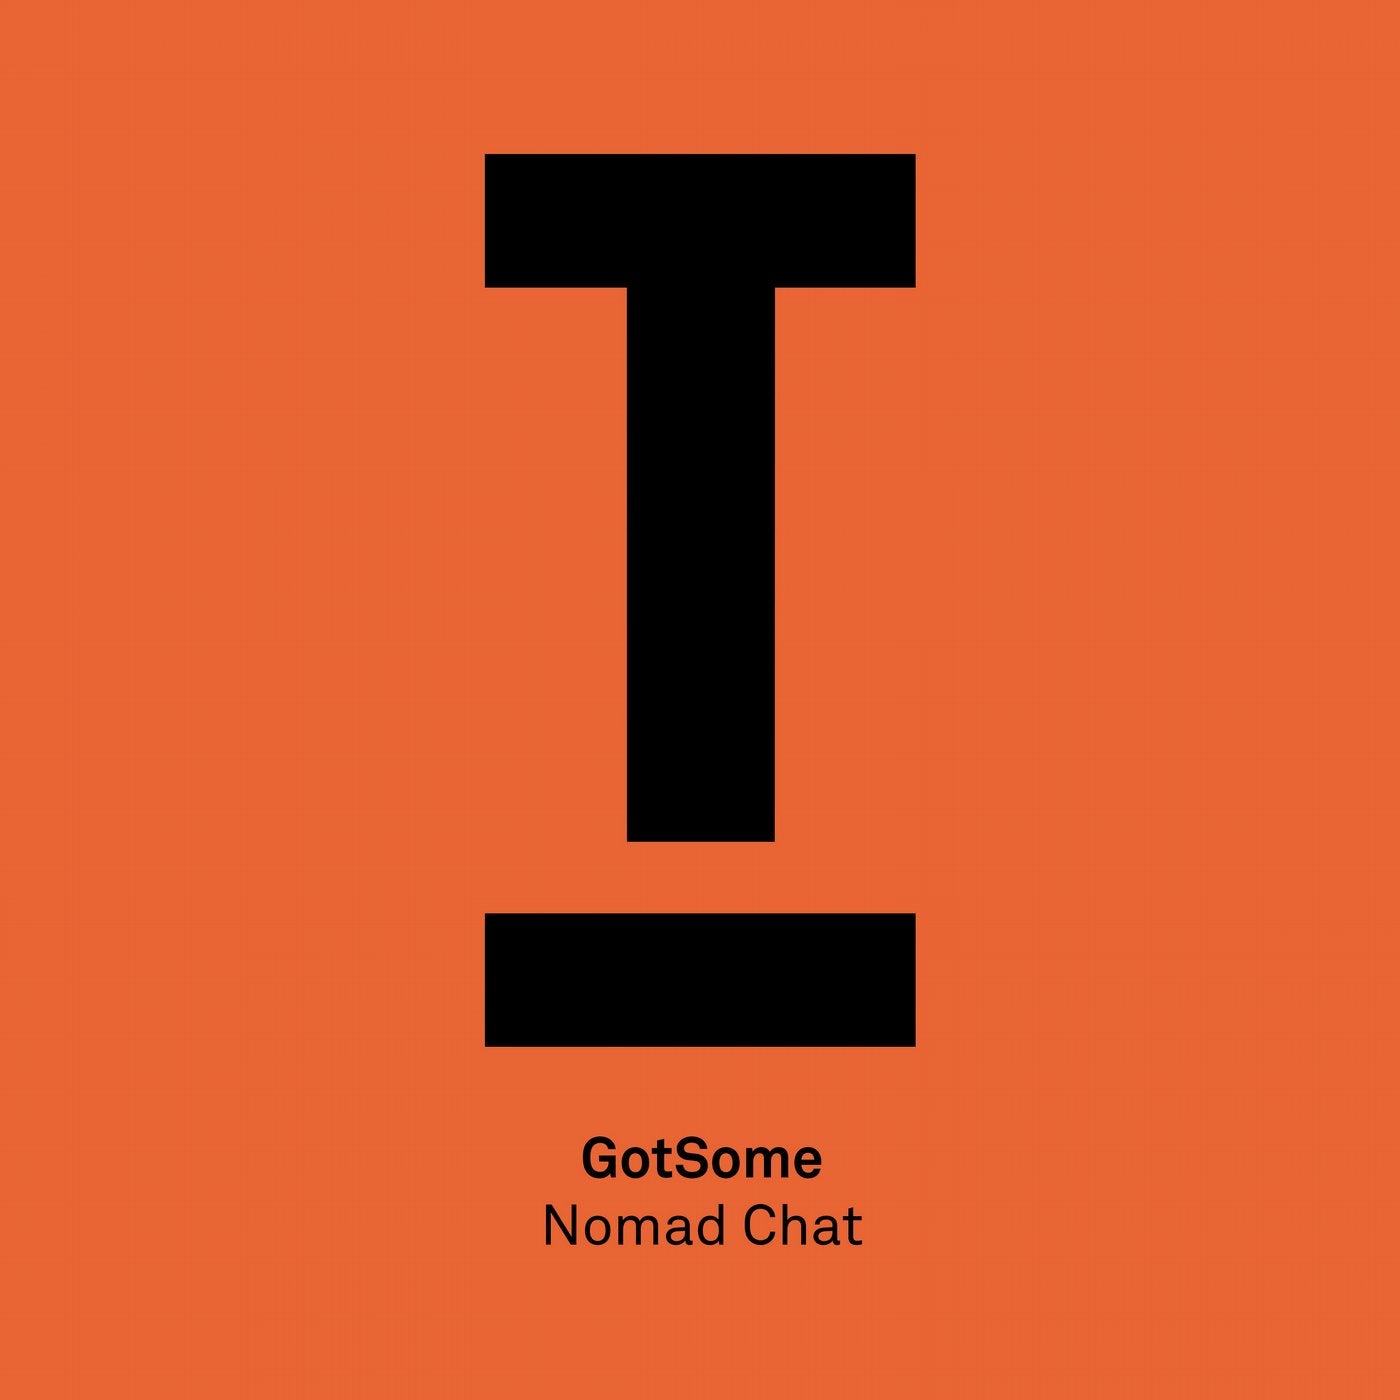 Nomad Chat